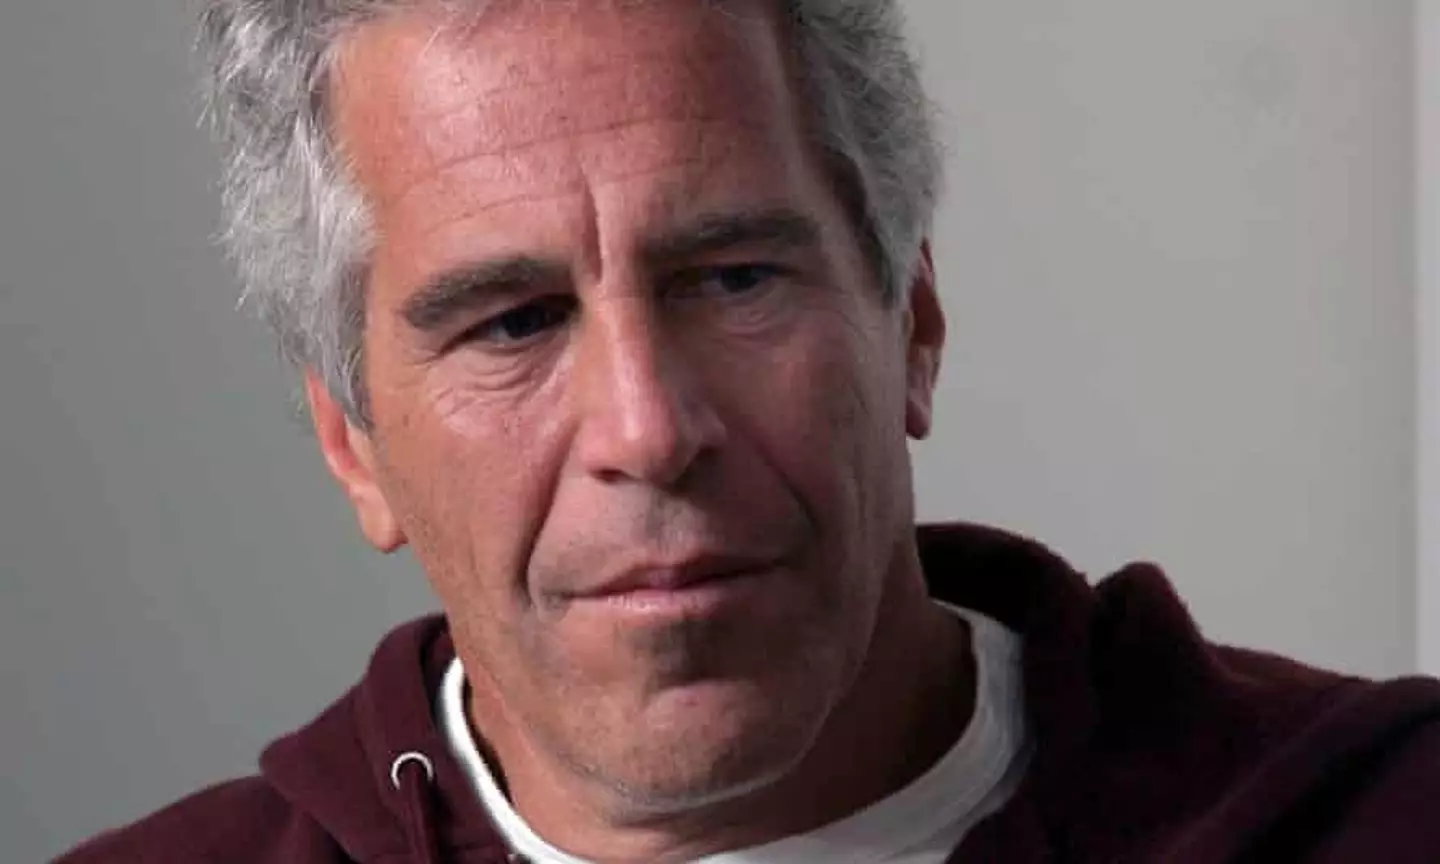 Surviving Jeffrey Epstein is one of the docs coming to the streamer (